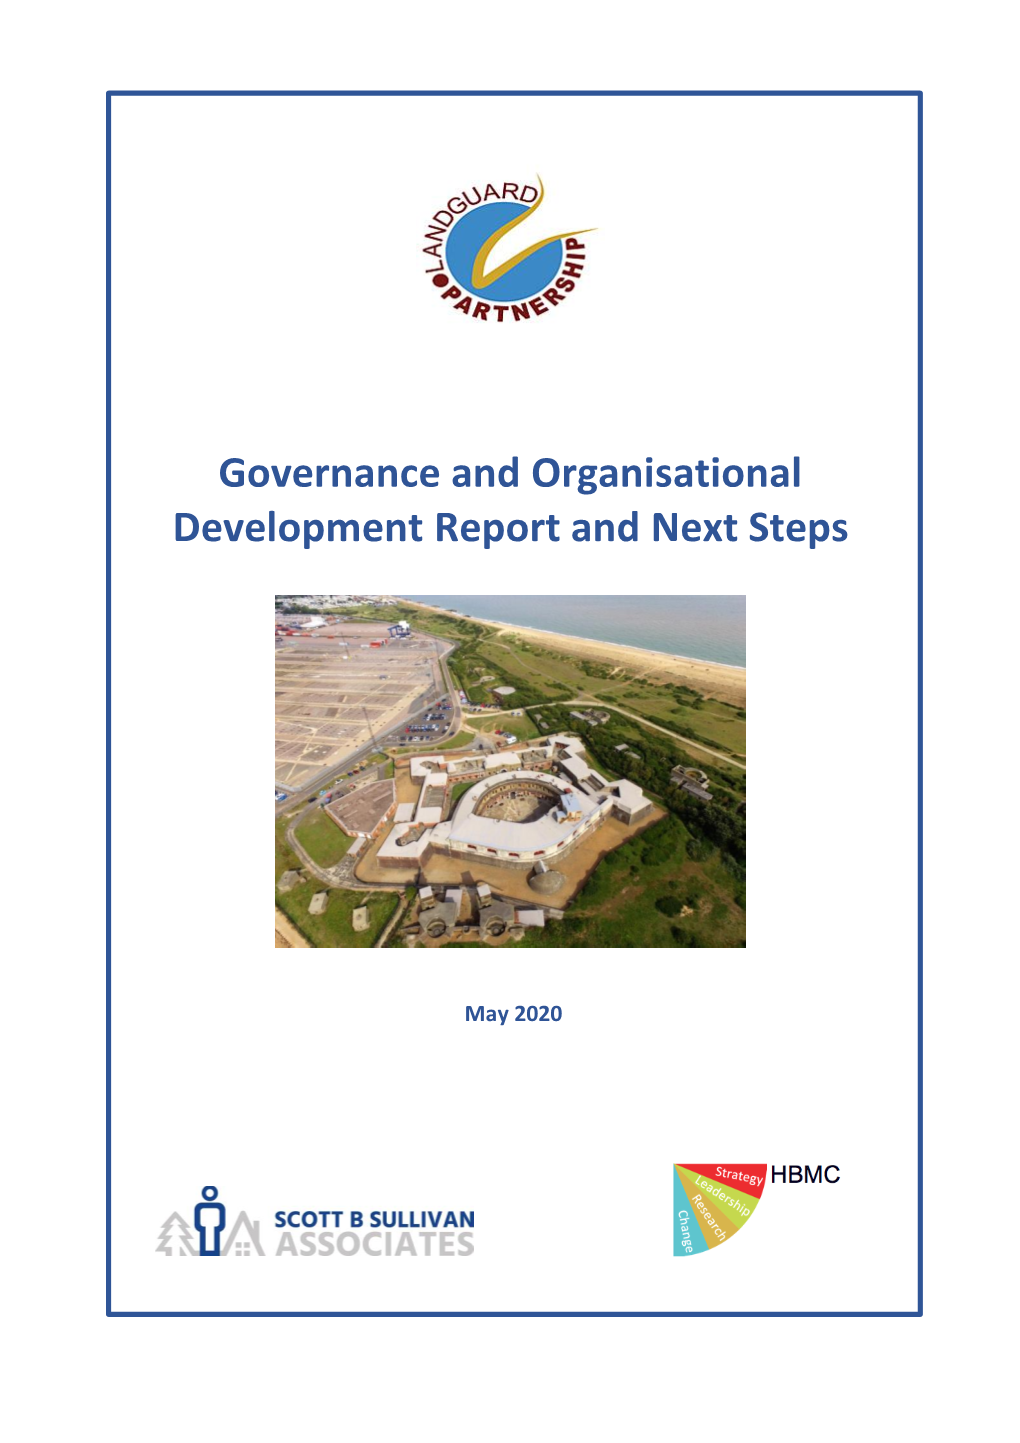 Governance and Organisational Development Report and Next Steps